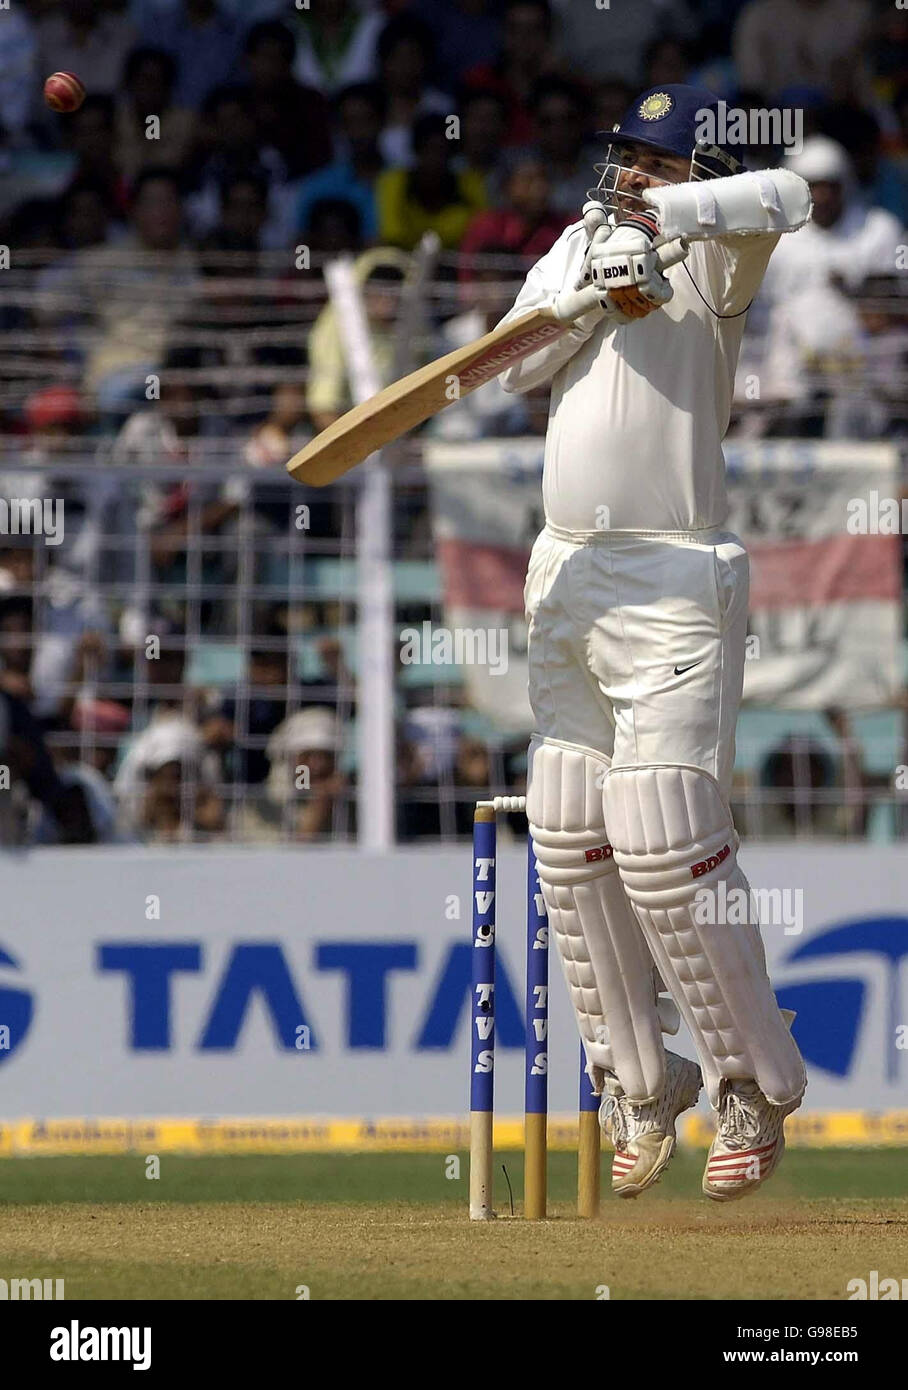 Indian batsman Virender Sehwag is dismissed by England bowler Matthew Hoggard during the second day of the third Test match at the Wankhede Stadium, Mumbai, India, Sunday March 19, 2006. PRESS ASSOCIATION Photo. Photo credit should read: Rebecca Naden/PA. ***- NO MOBILE PHONE USE*** Stock Photo